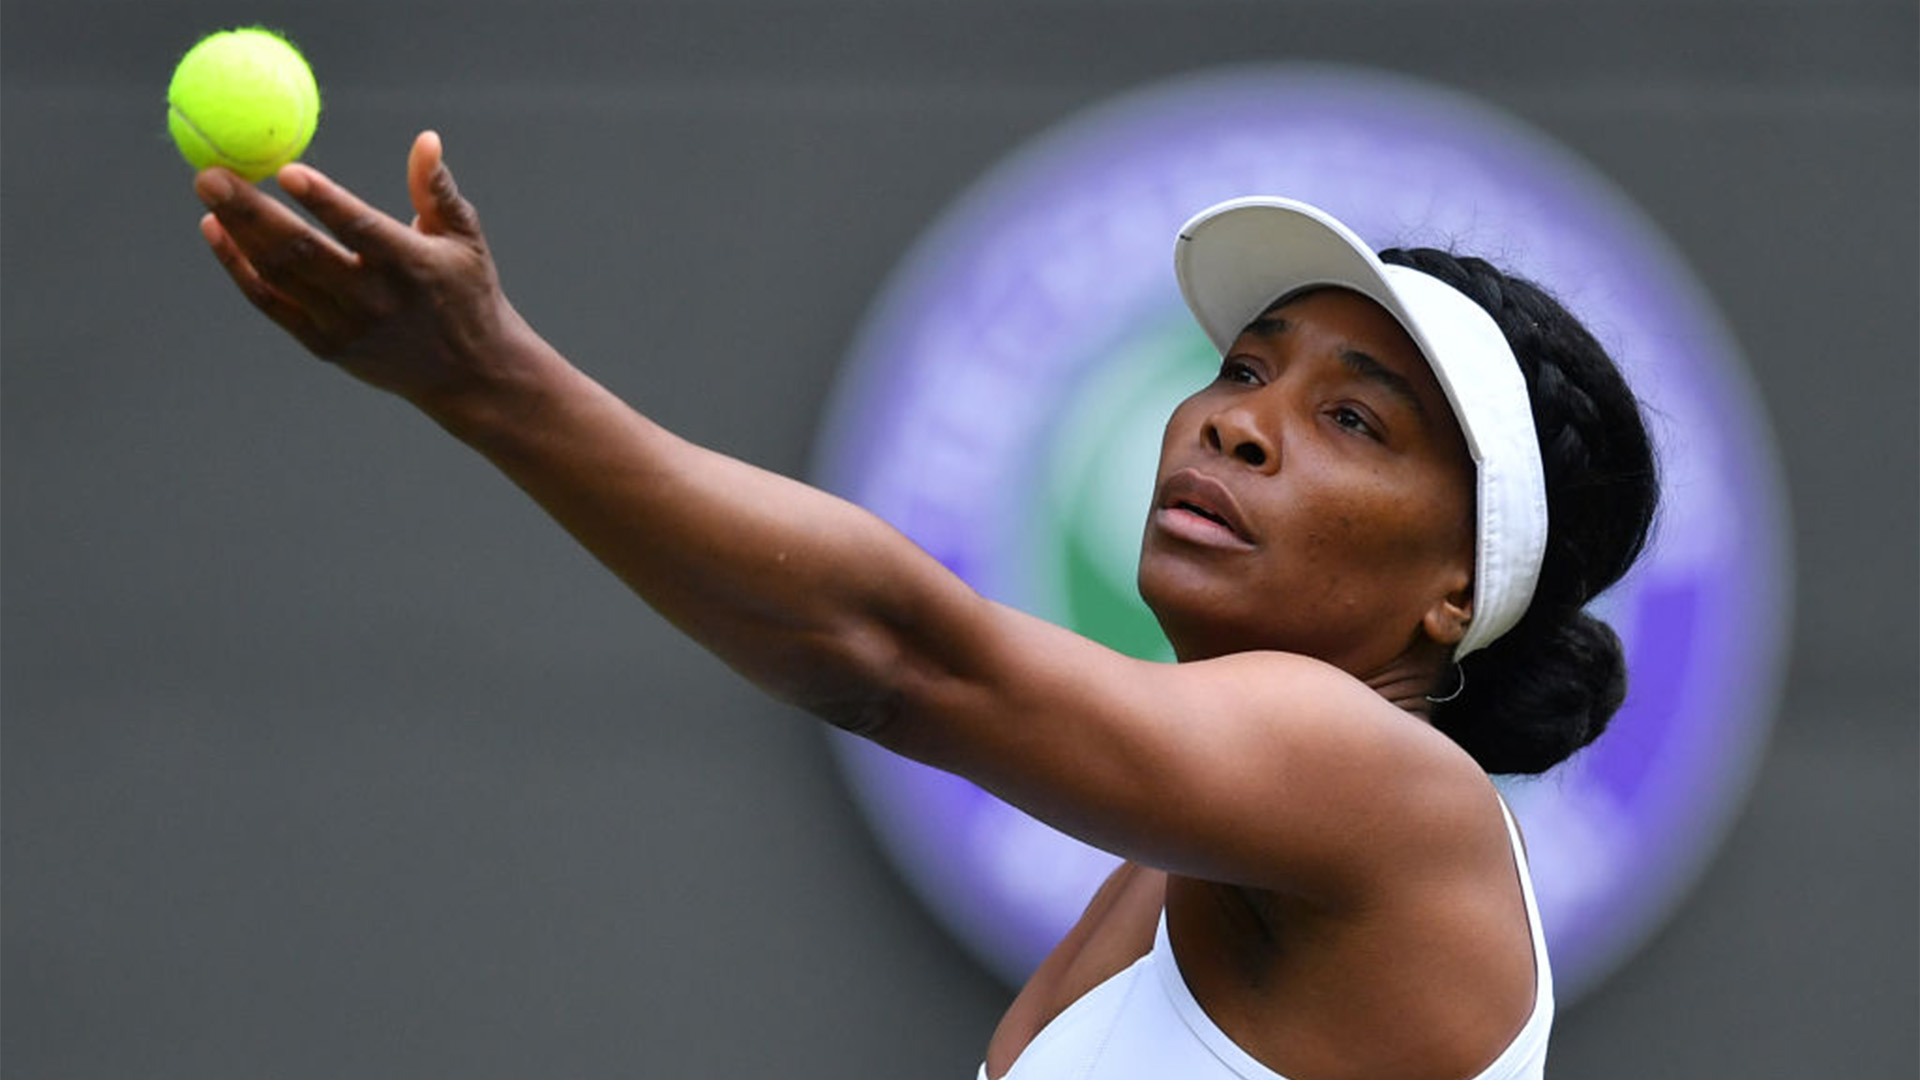 Venus Williams' Support System Helped Her Cope With Sjogren’s Syndrome — Now, She Hopes To Help Others Have Support With BetterHelp